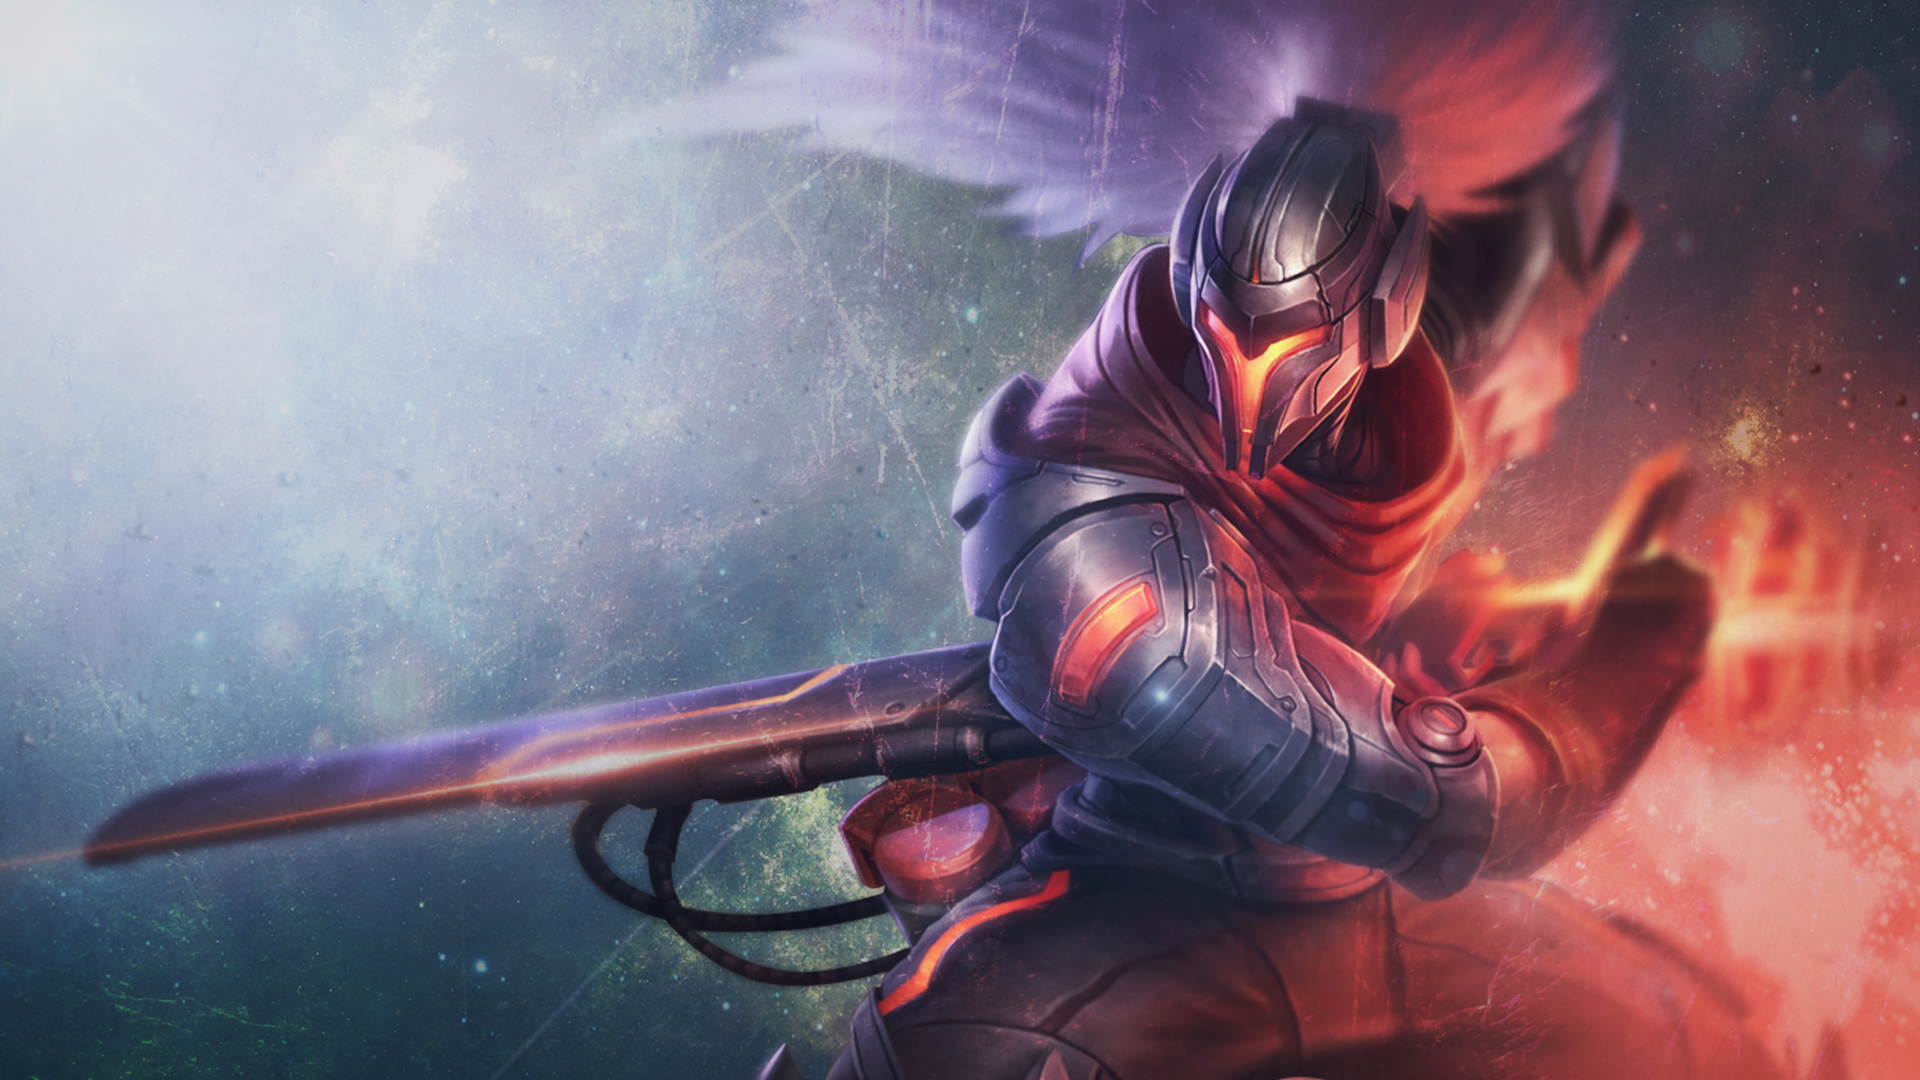 Project Yasuo Png Hd   Project Yasuo Wallpaper Hd   1920x1080